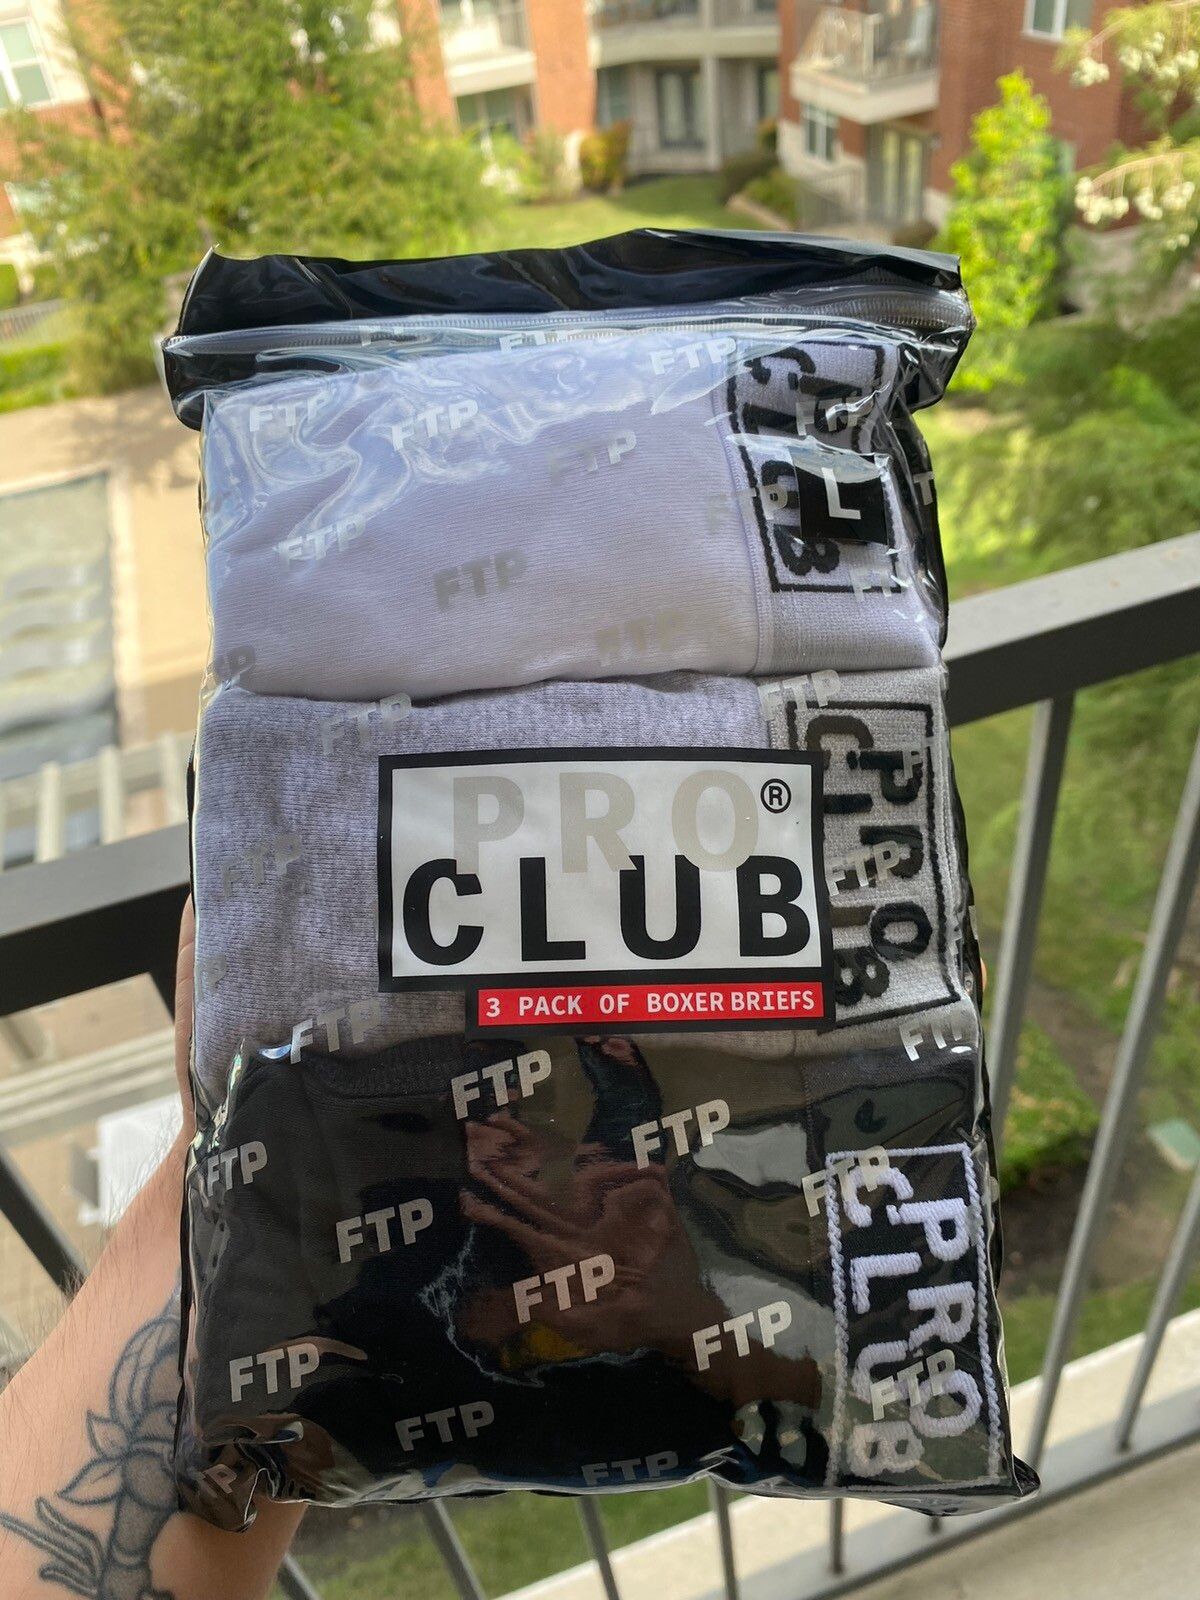 Fuck The Population FTP + PRO CLUB 3 PACK BOXER BRIEFS (LARGE)